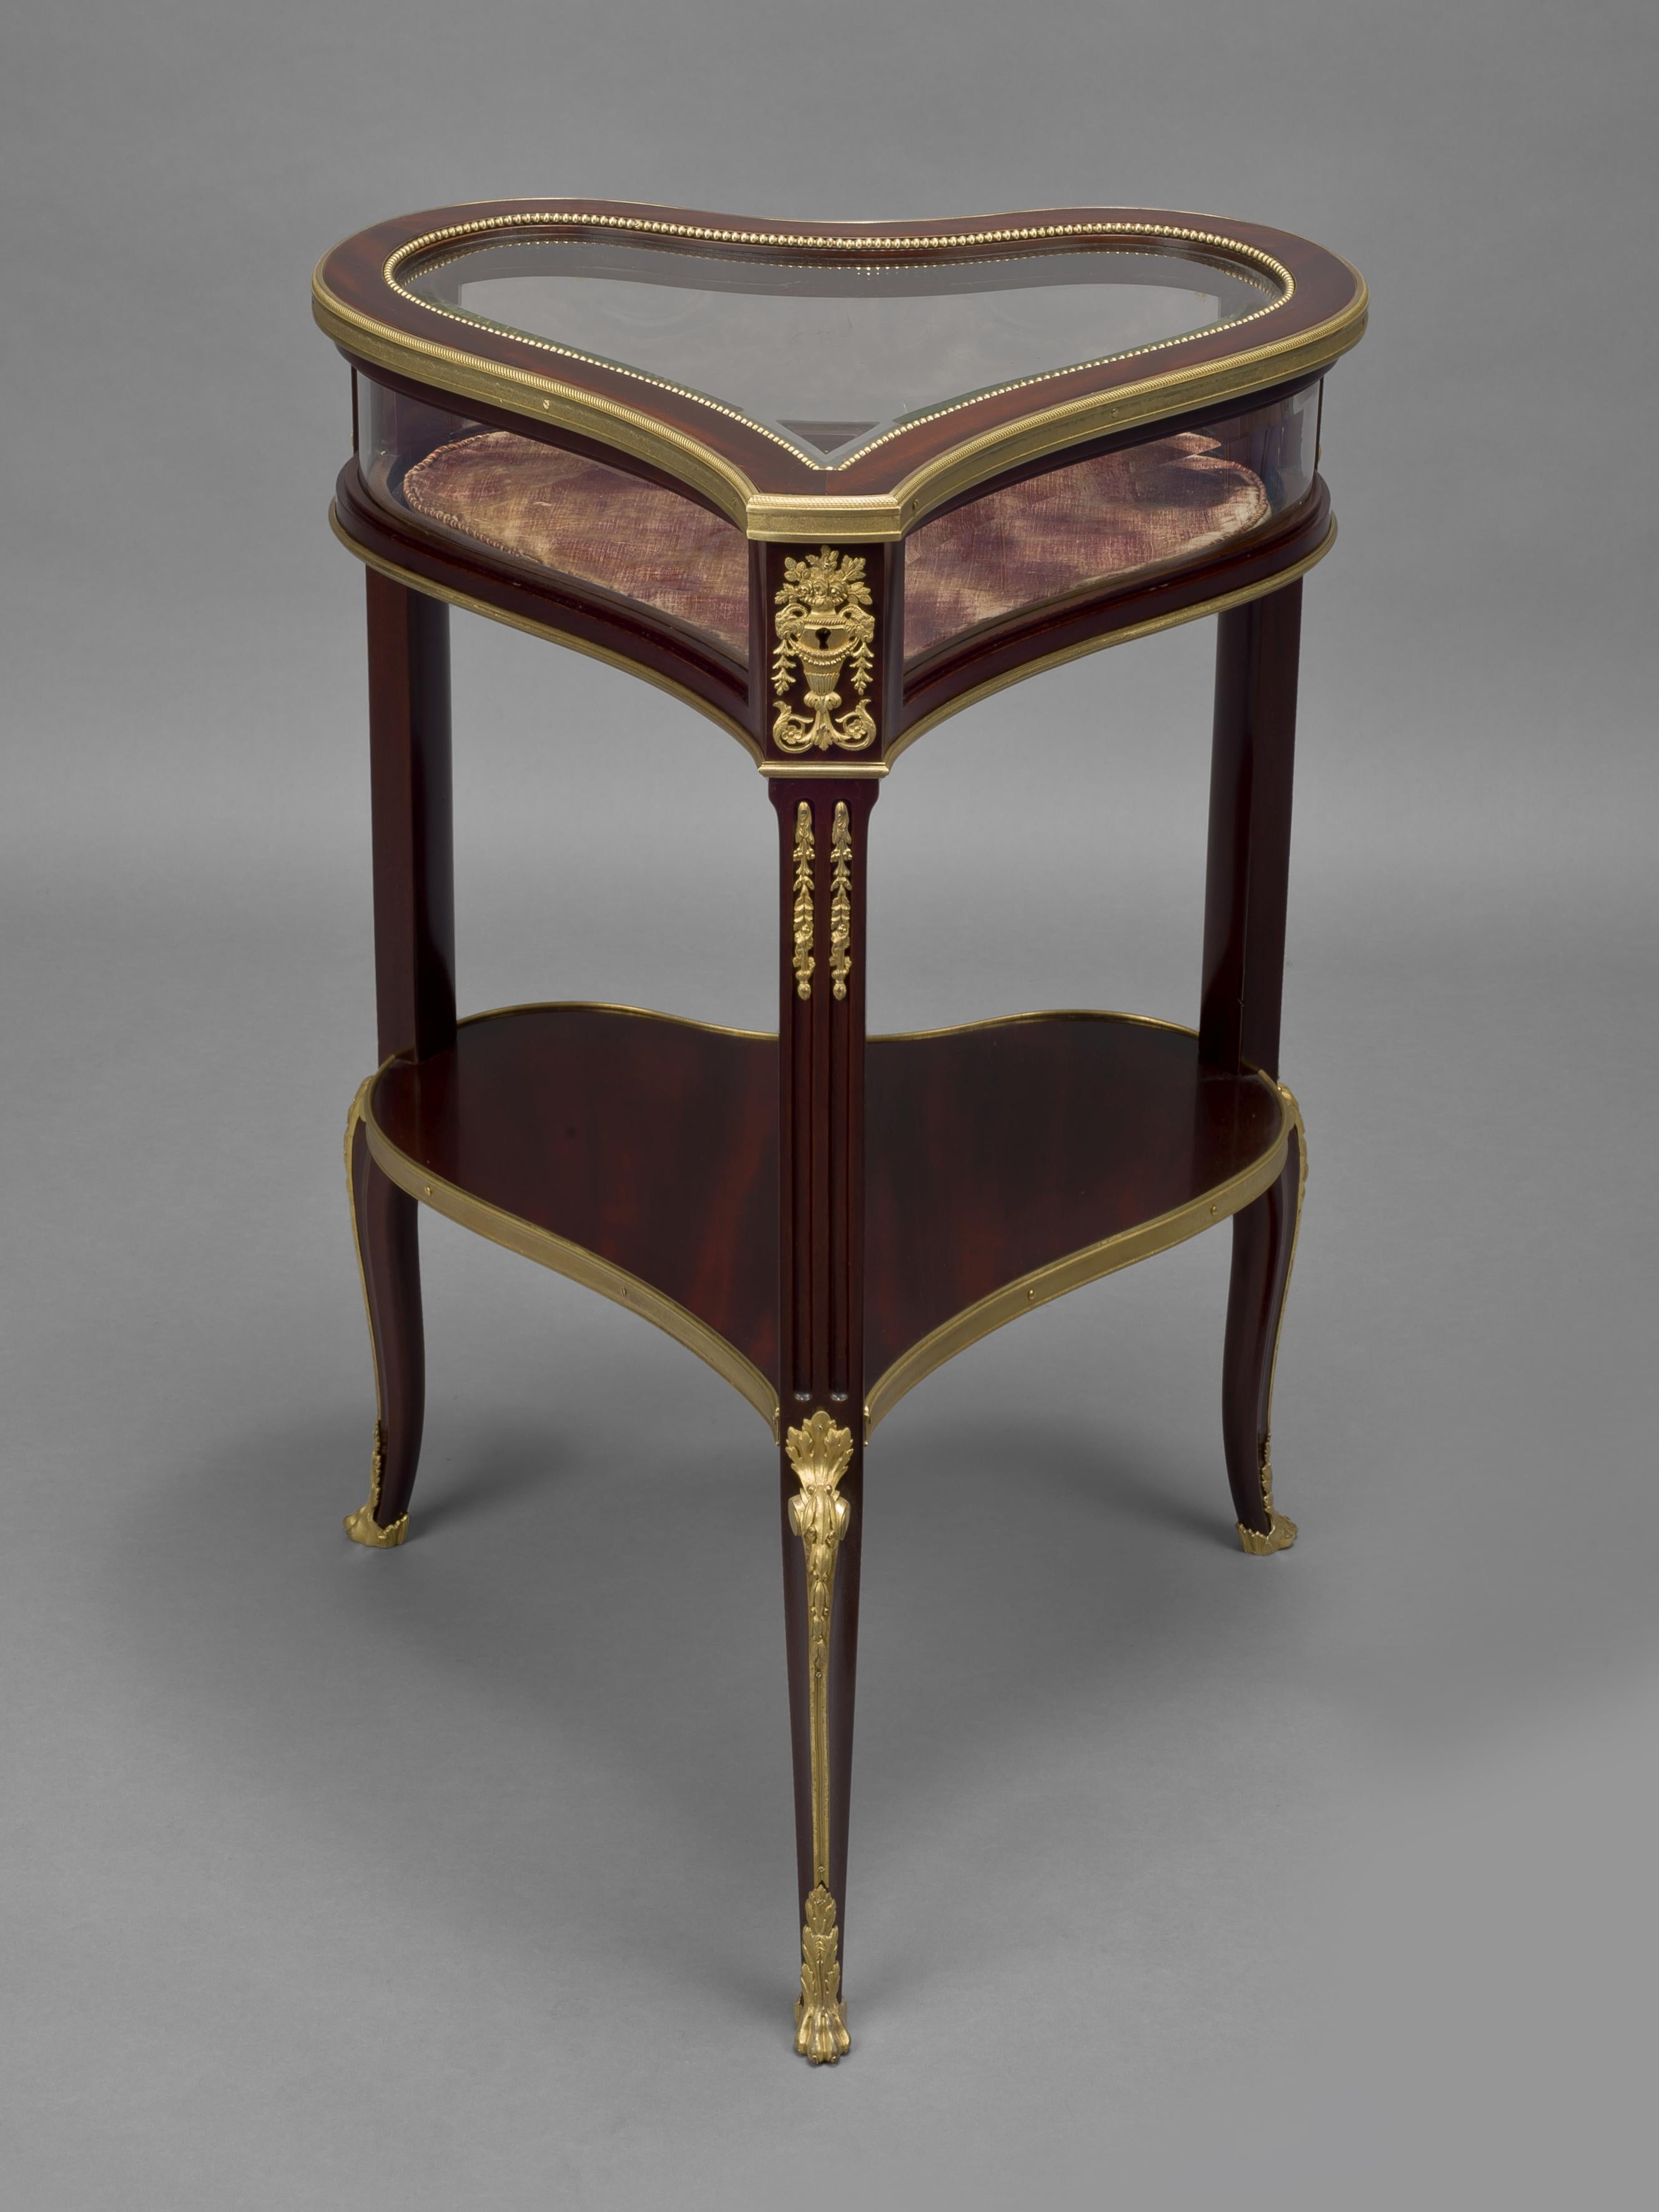 A fine gilt-bronze mounted mahogany table vitrine by Georges-Francois Alix. 

French, circa 1890. 

Stamped to the underside and to the reverse of the gilt-bronze mounts 'Alix'. 

This unusual heart shaped bijouterie table has a hinged glass